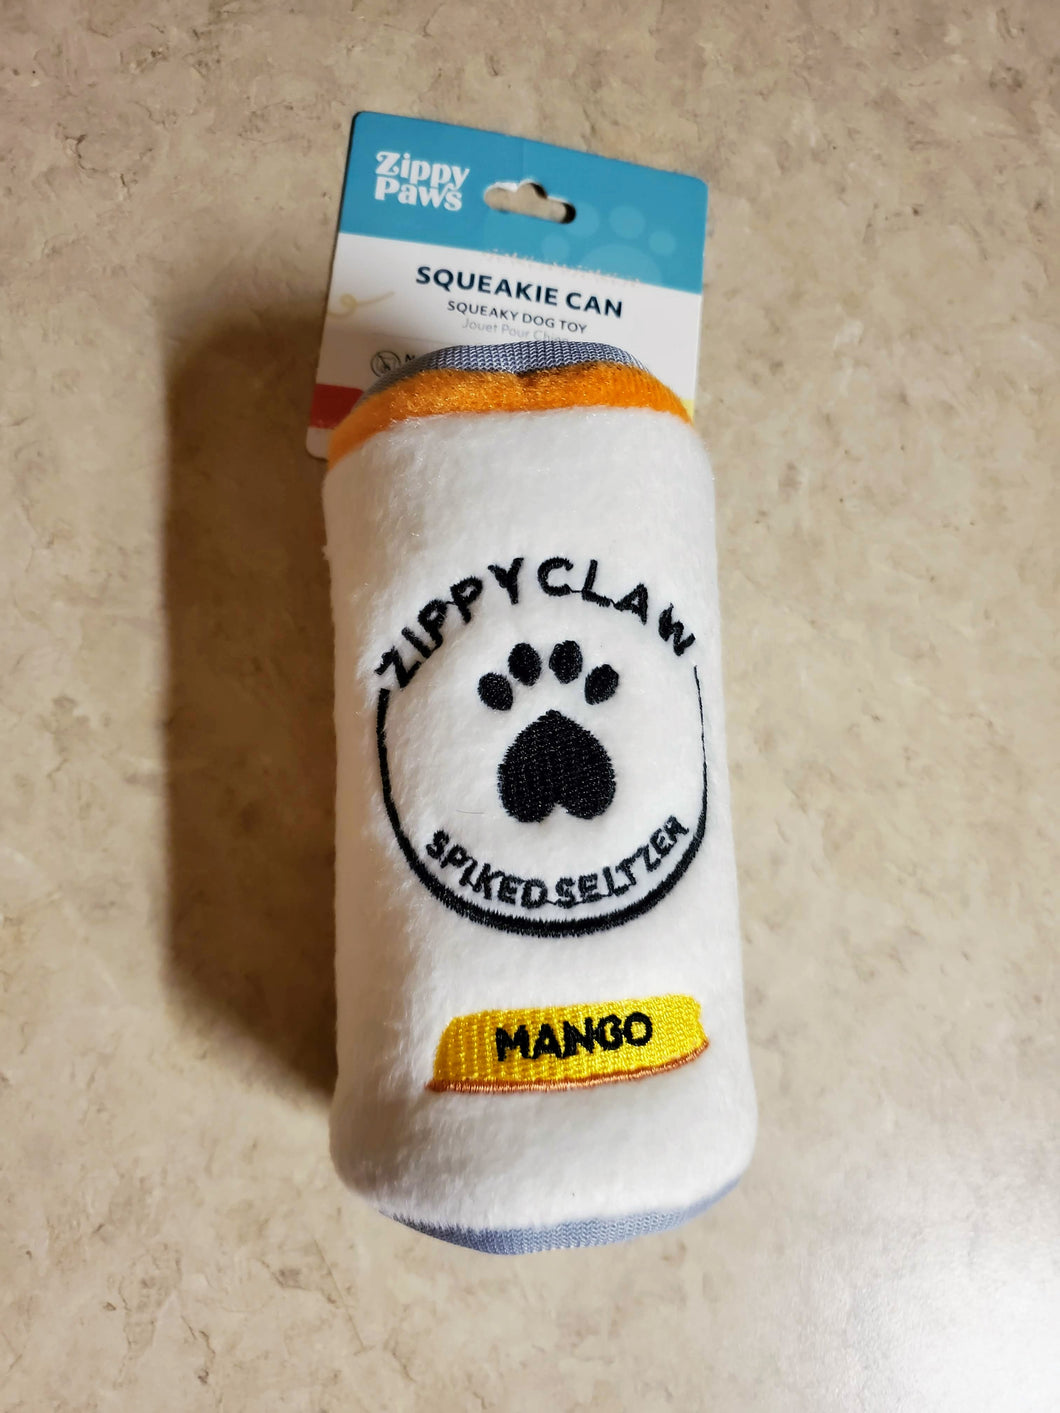 Zippy Claw Squeakie Can Toy